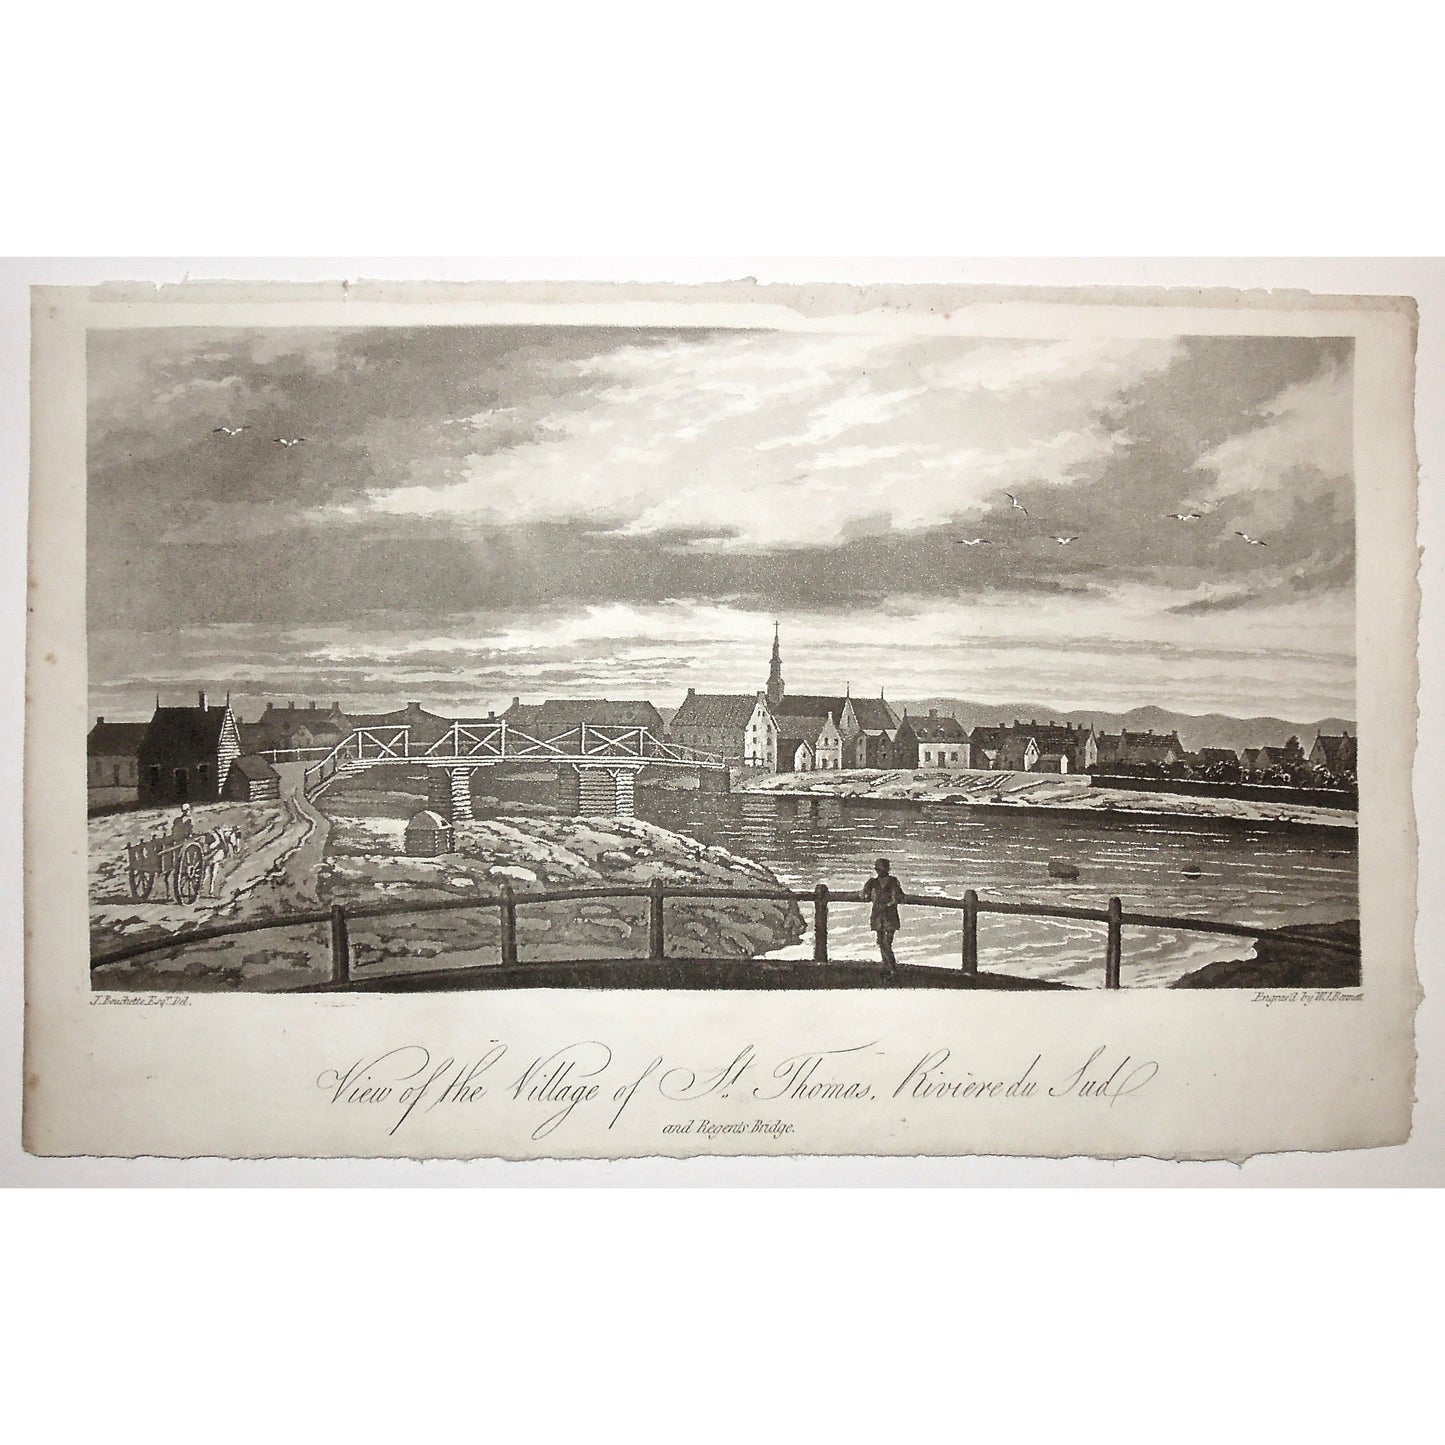 View, Village, St. Thomas, Riviere du Sud, Quebec, Canada, town, bridge, church, horse and carriage, horse and buggy, Canadian village, A Topographical Description of the Province of Lower Canada, Lower Canada, Joseph Bouchette, Bouchette, 1815, W. Faden, Faden, W. J. Bennett, Bennett, Charing Cross, London, steel engraving, black and white, Antique, Prints, Vintage, Decor, History, Canadiana, 